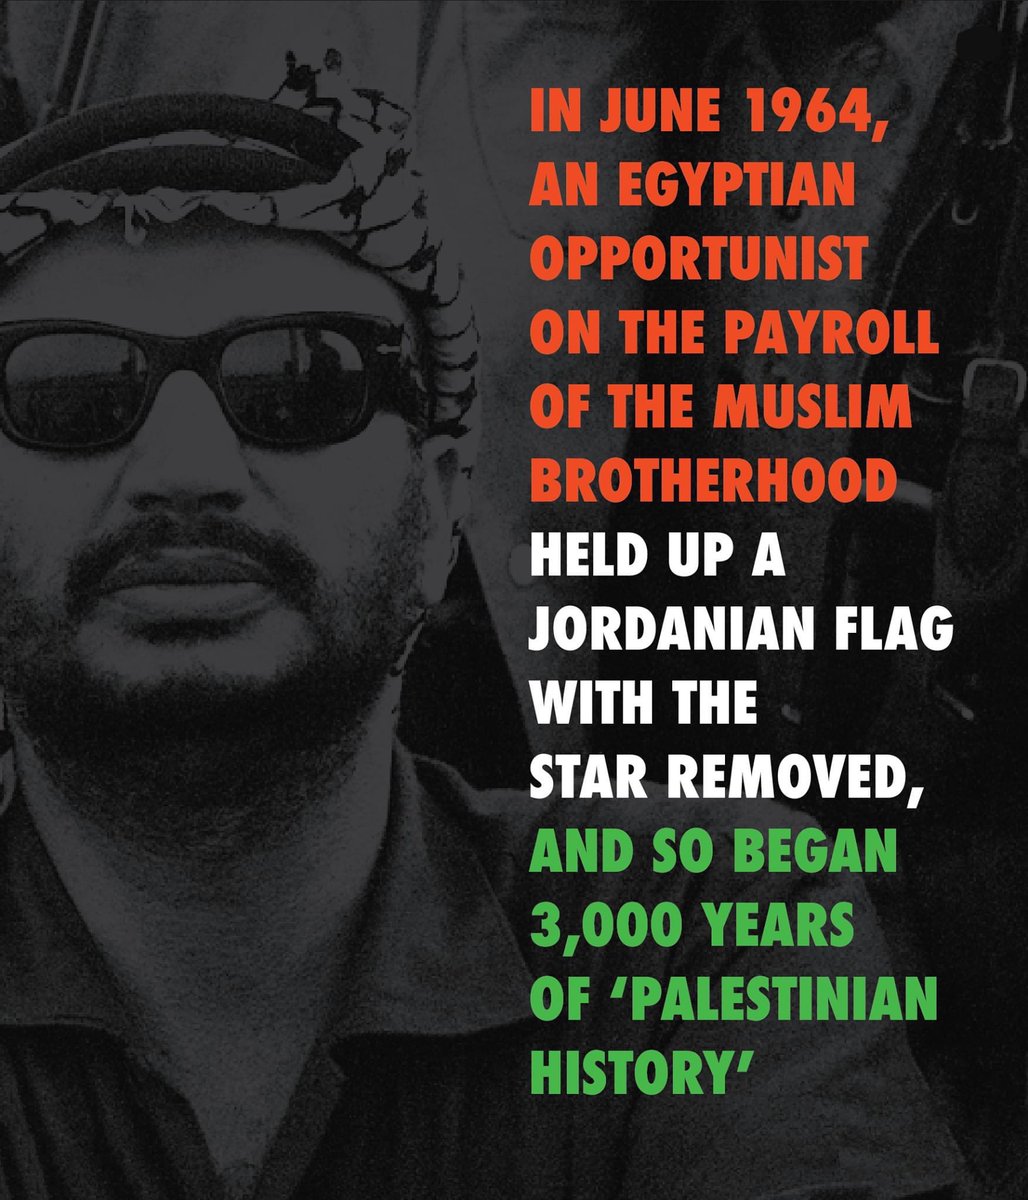 @ImtiazMadmood Before 1964 there was no 'Palestinian flag'.